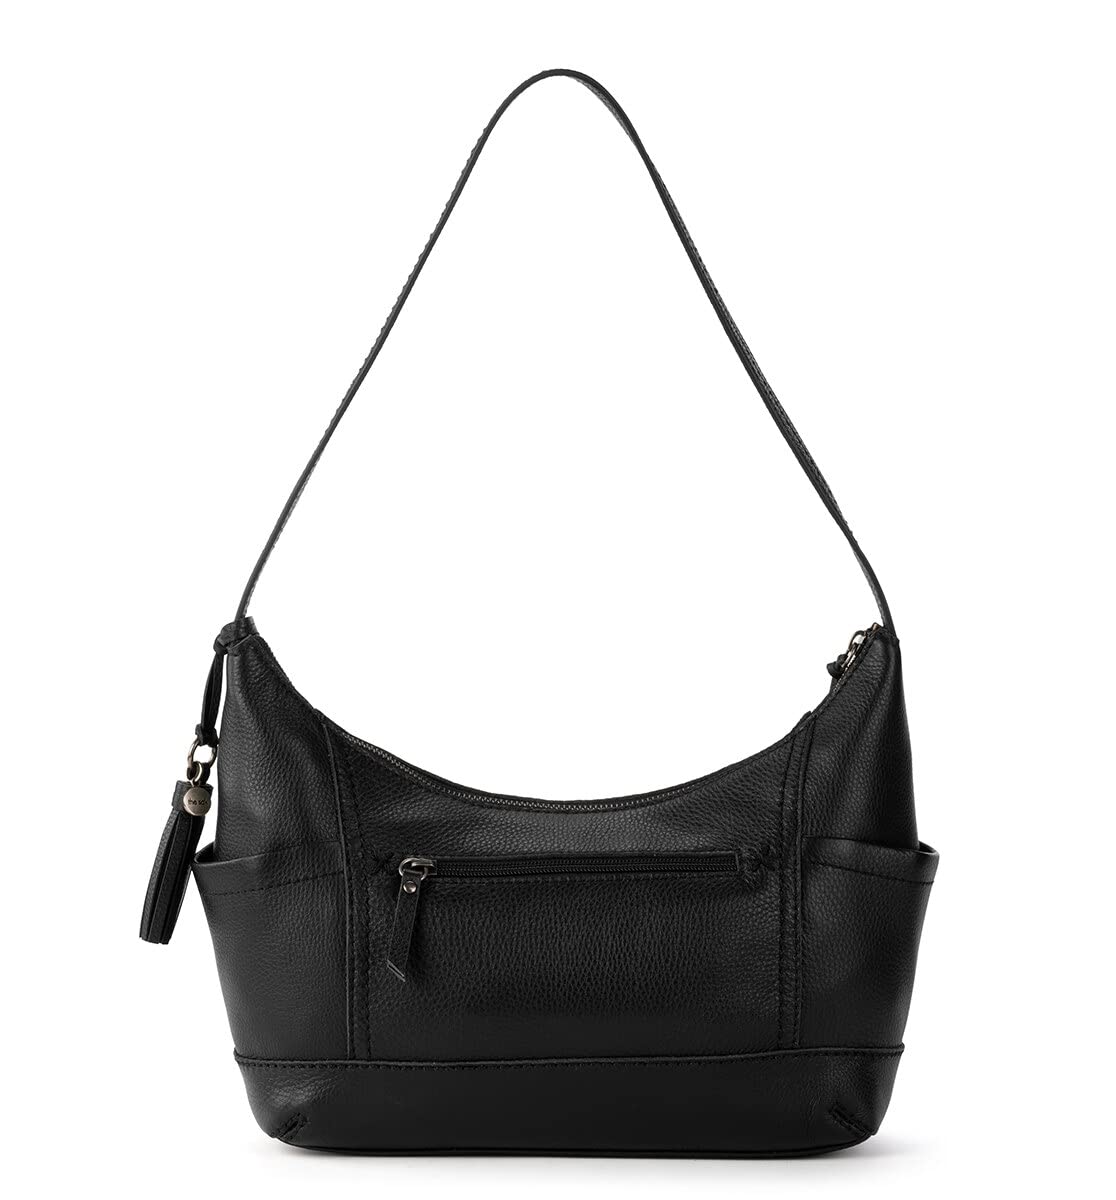 The Sak womens Kendra Hobo Bag in Leather Timeless Elevated Silhouette Soft Supple Handcrafted Sustainably, Black Ii, One Size US